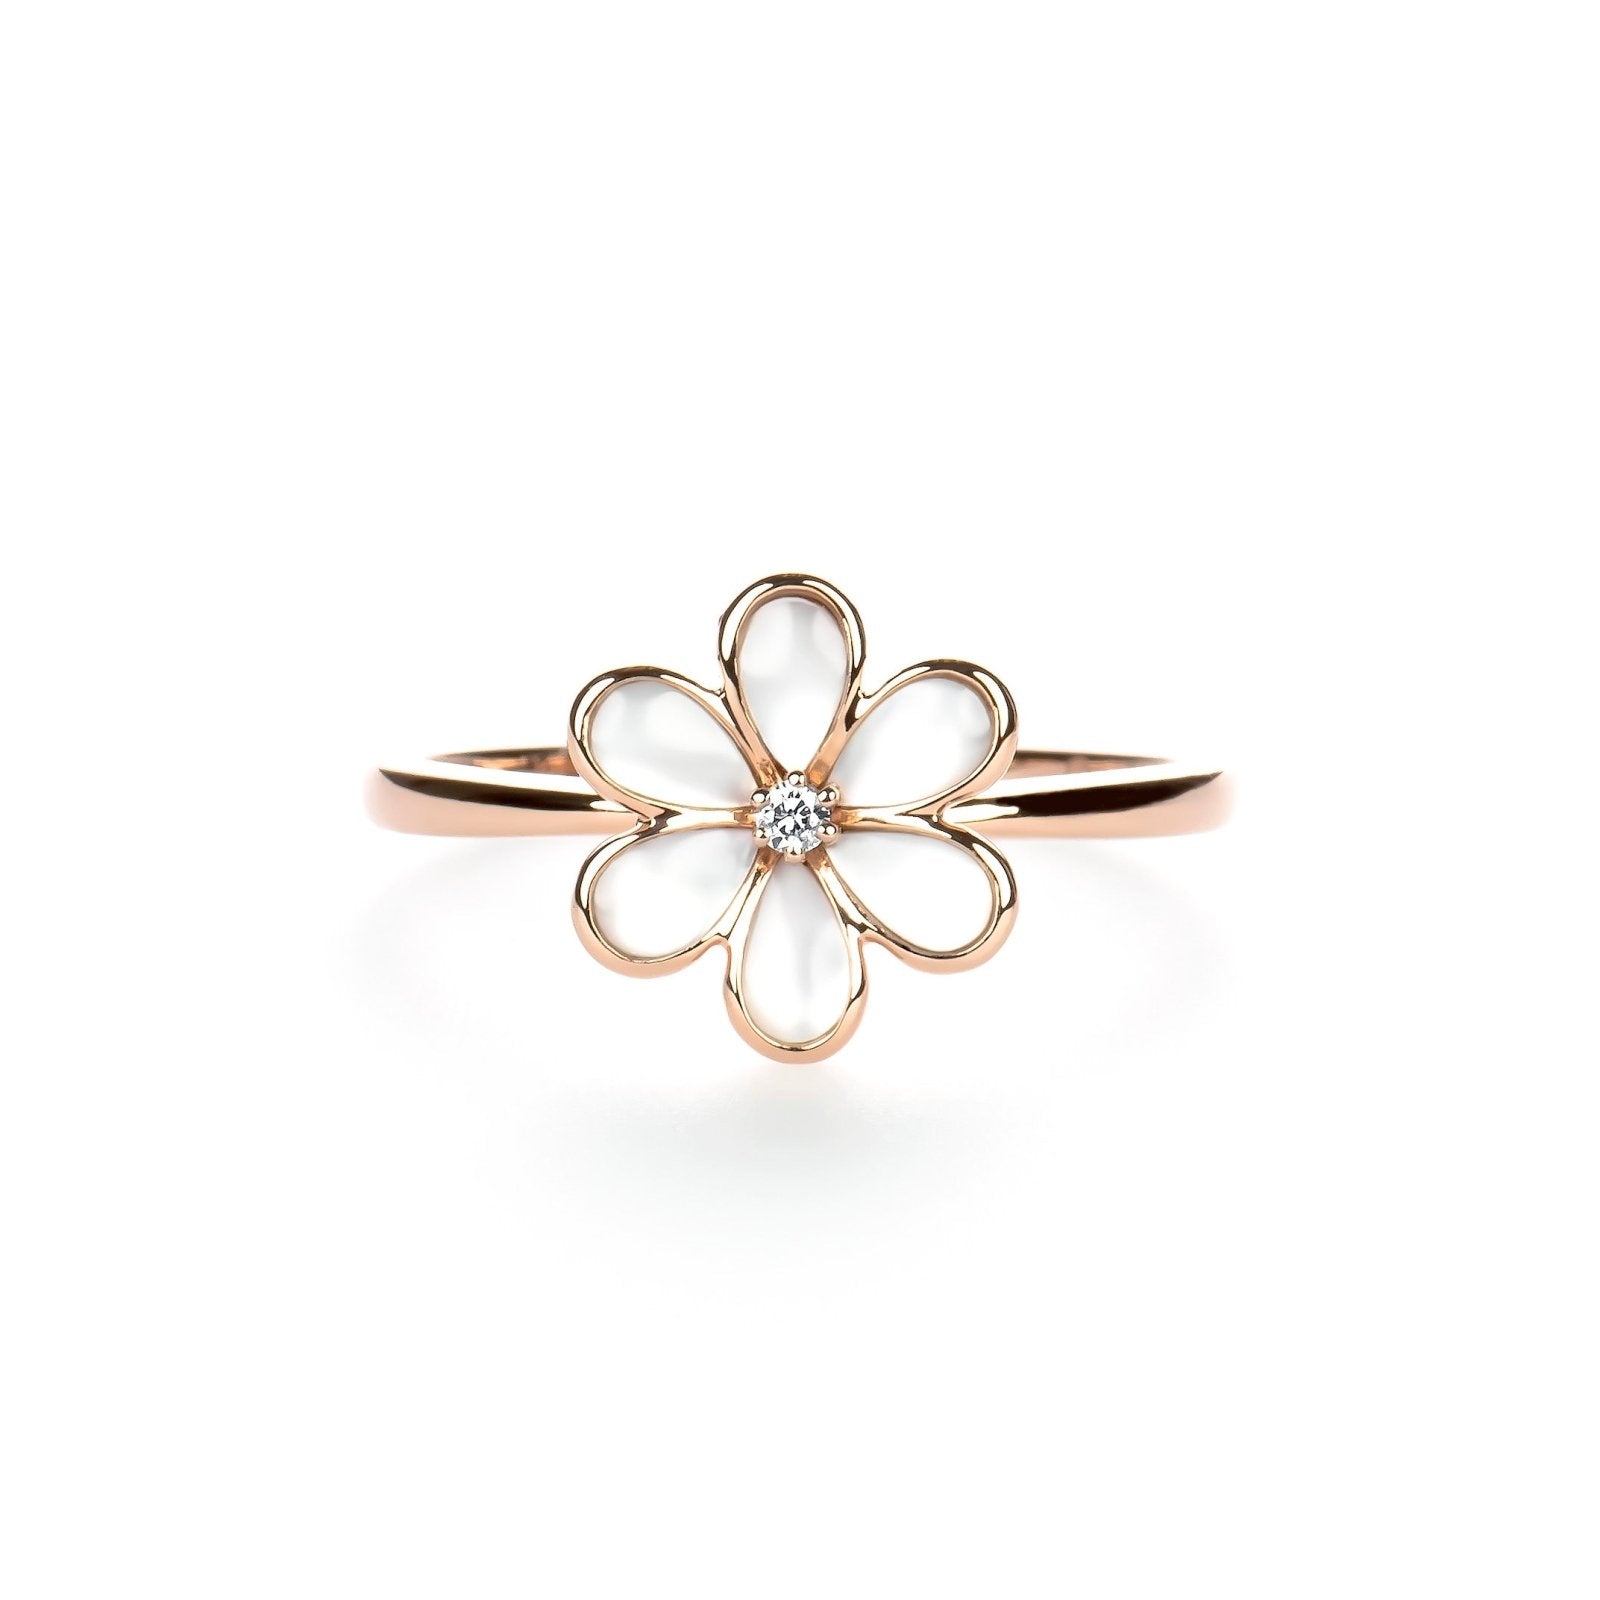 Mother of Pearl Flower with Diamond Center Ring Rings Estella Collection #product_description# 17202 14k Birthstone Diamond #tag4# #tag5# #tag6# #tag7# #tag8# #tag9# #tag10# 6